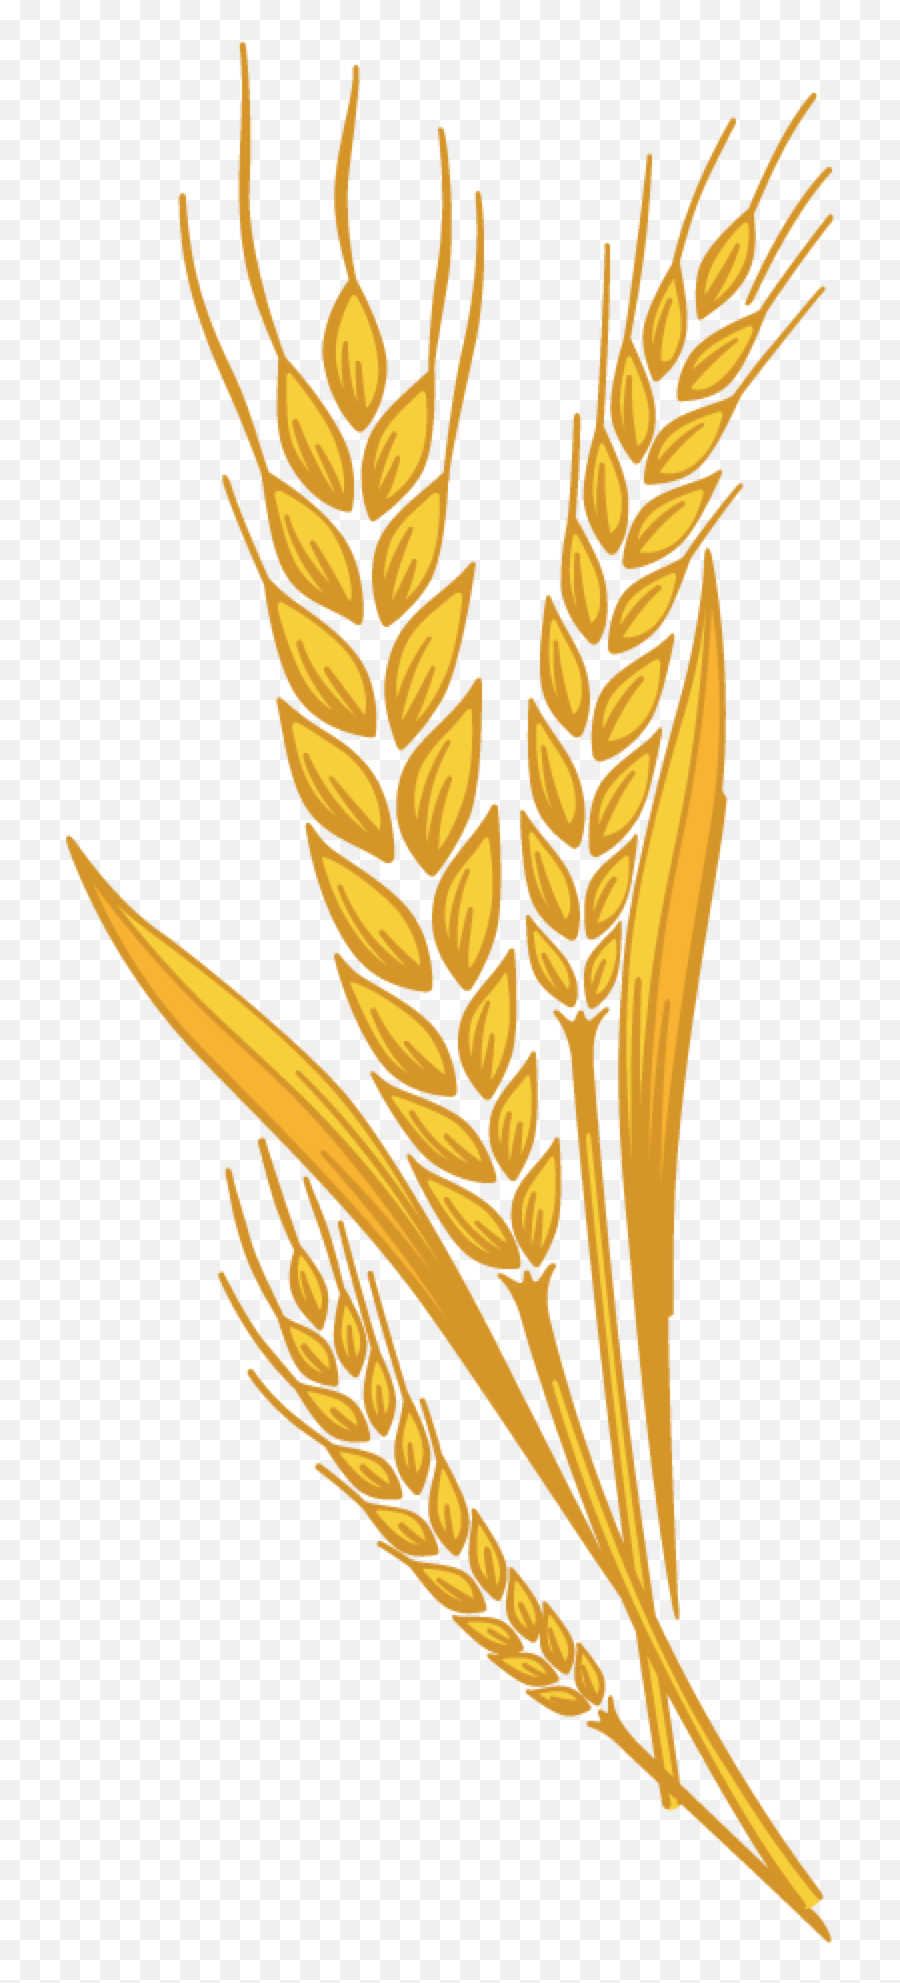 Library Of Shock Of Wheat Graphic - Wheat Clipart Png Emoji,Wheat Clipart